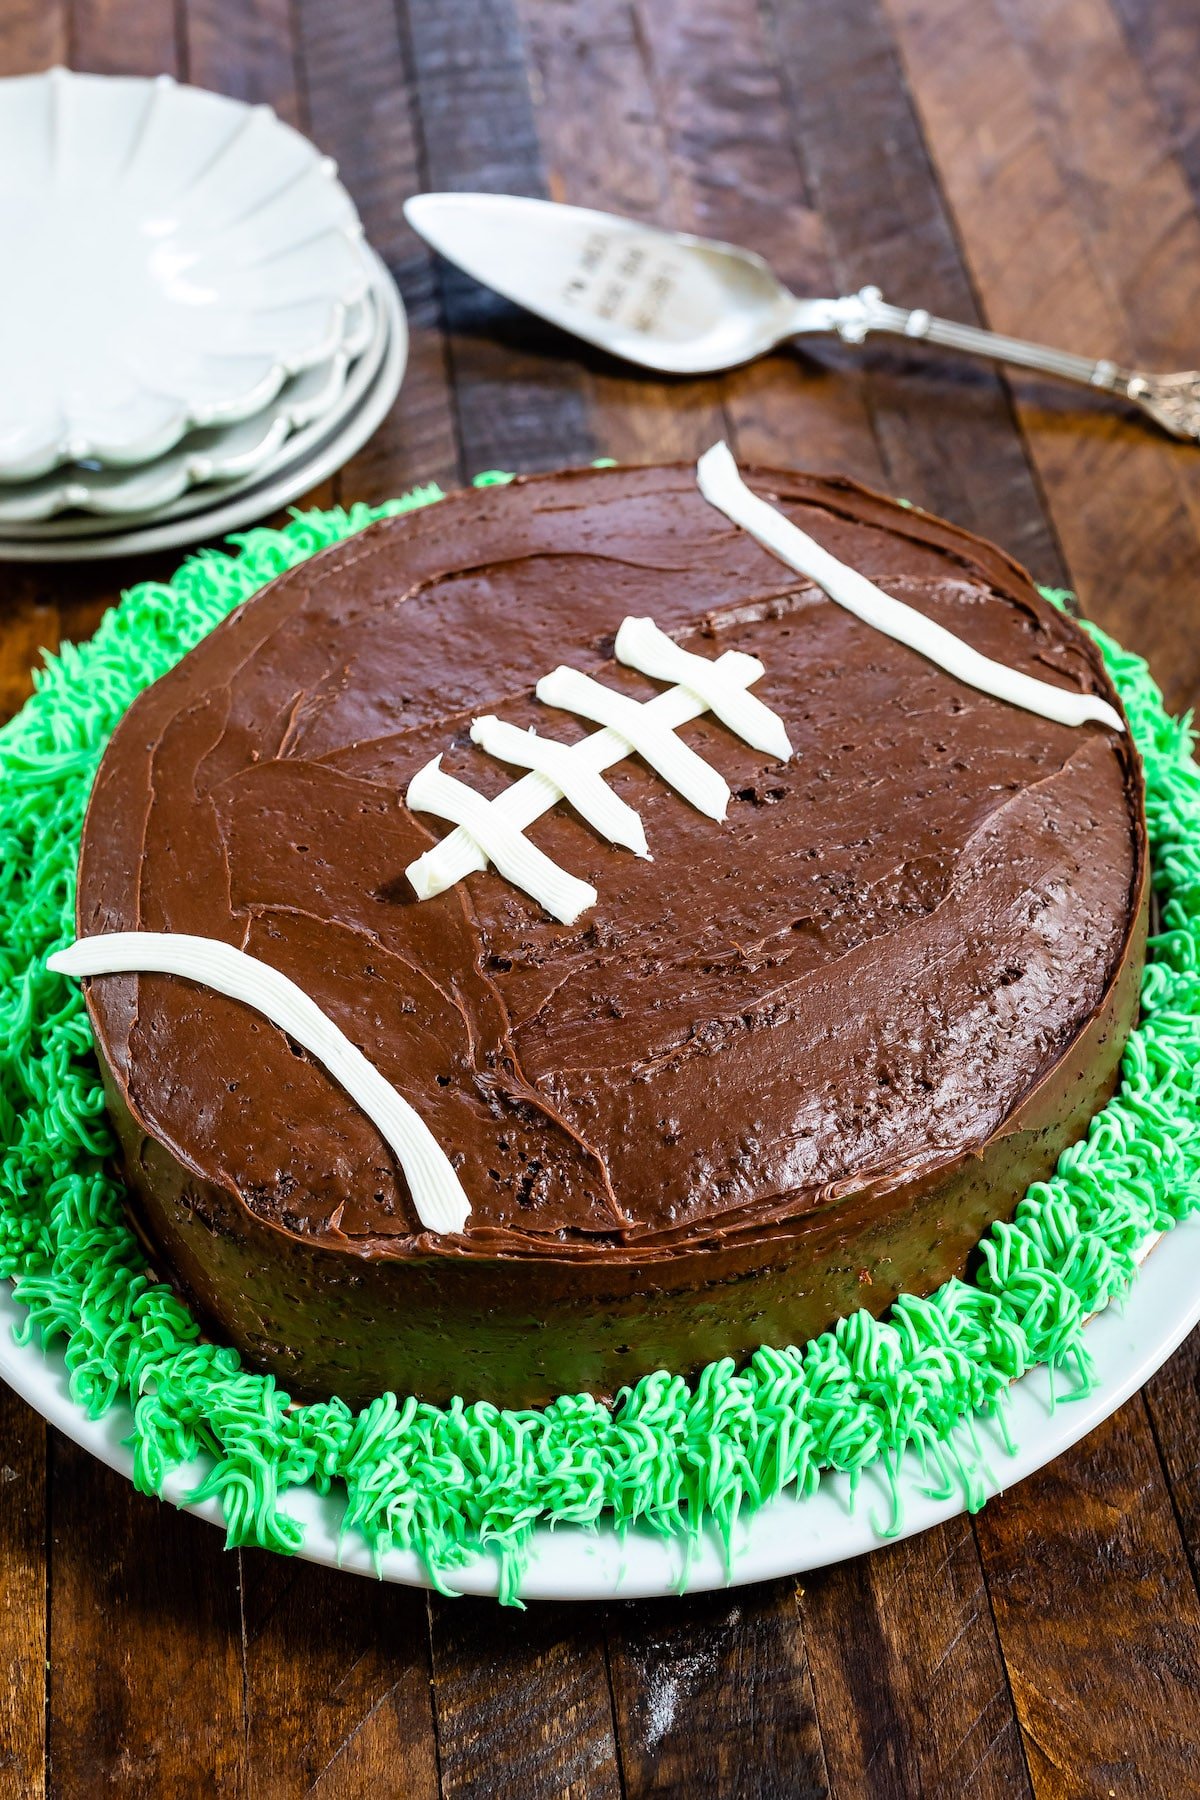 cake on plate decorated like football with green frosting like grass on wood background